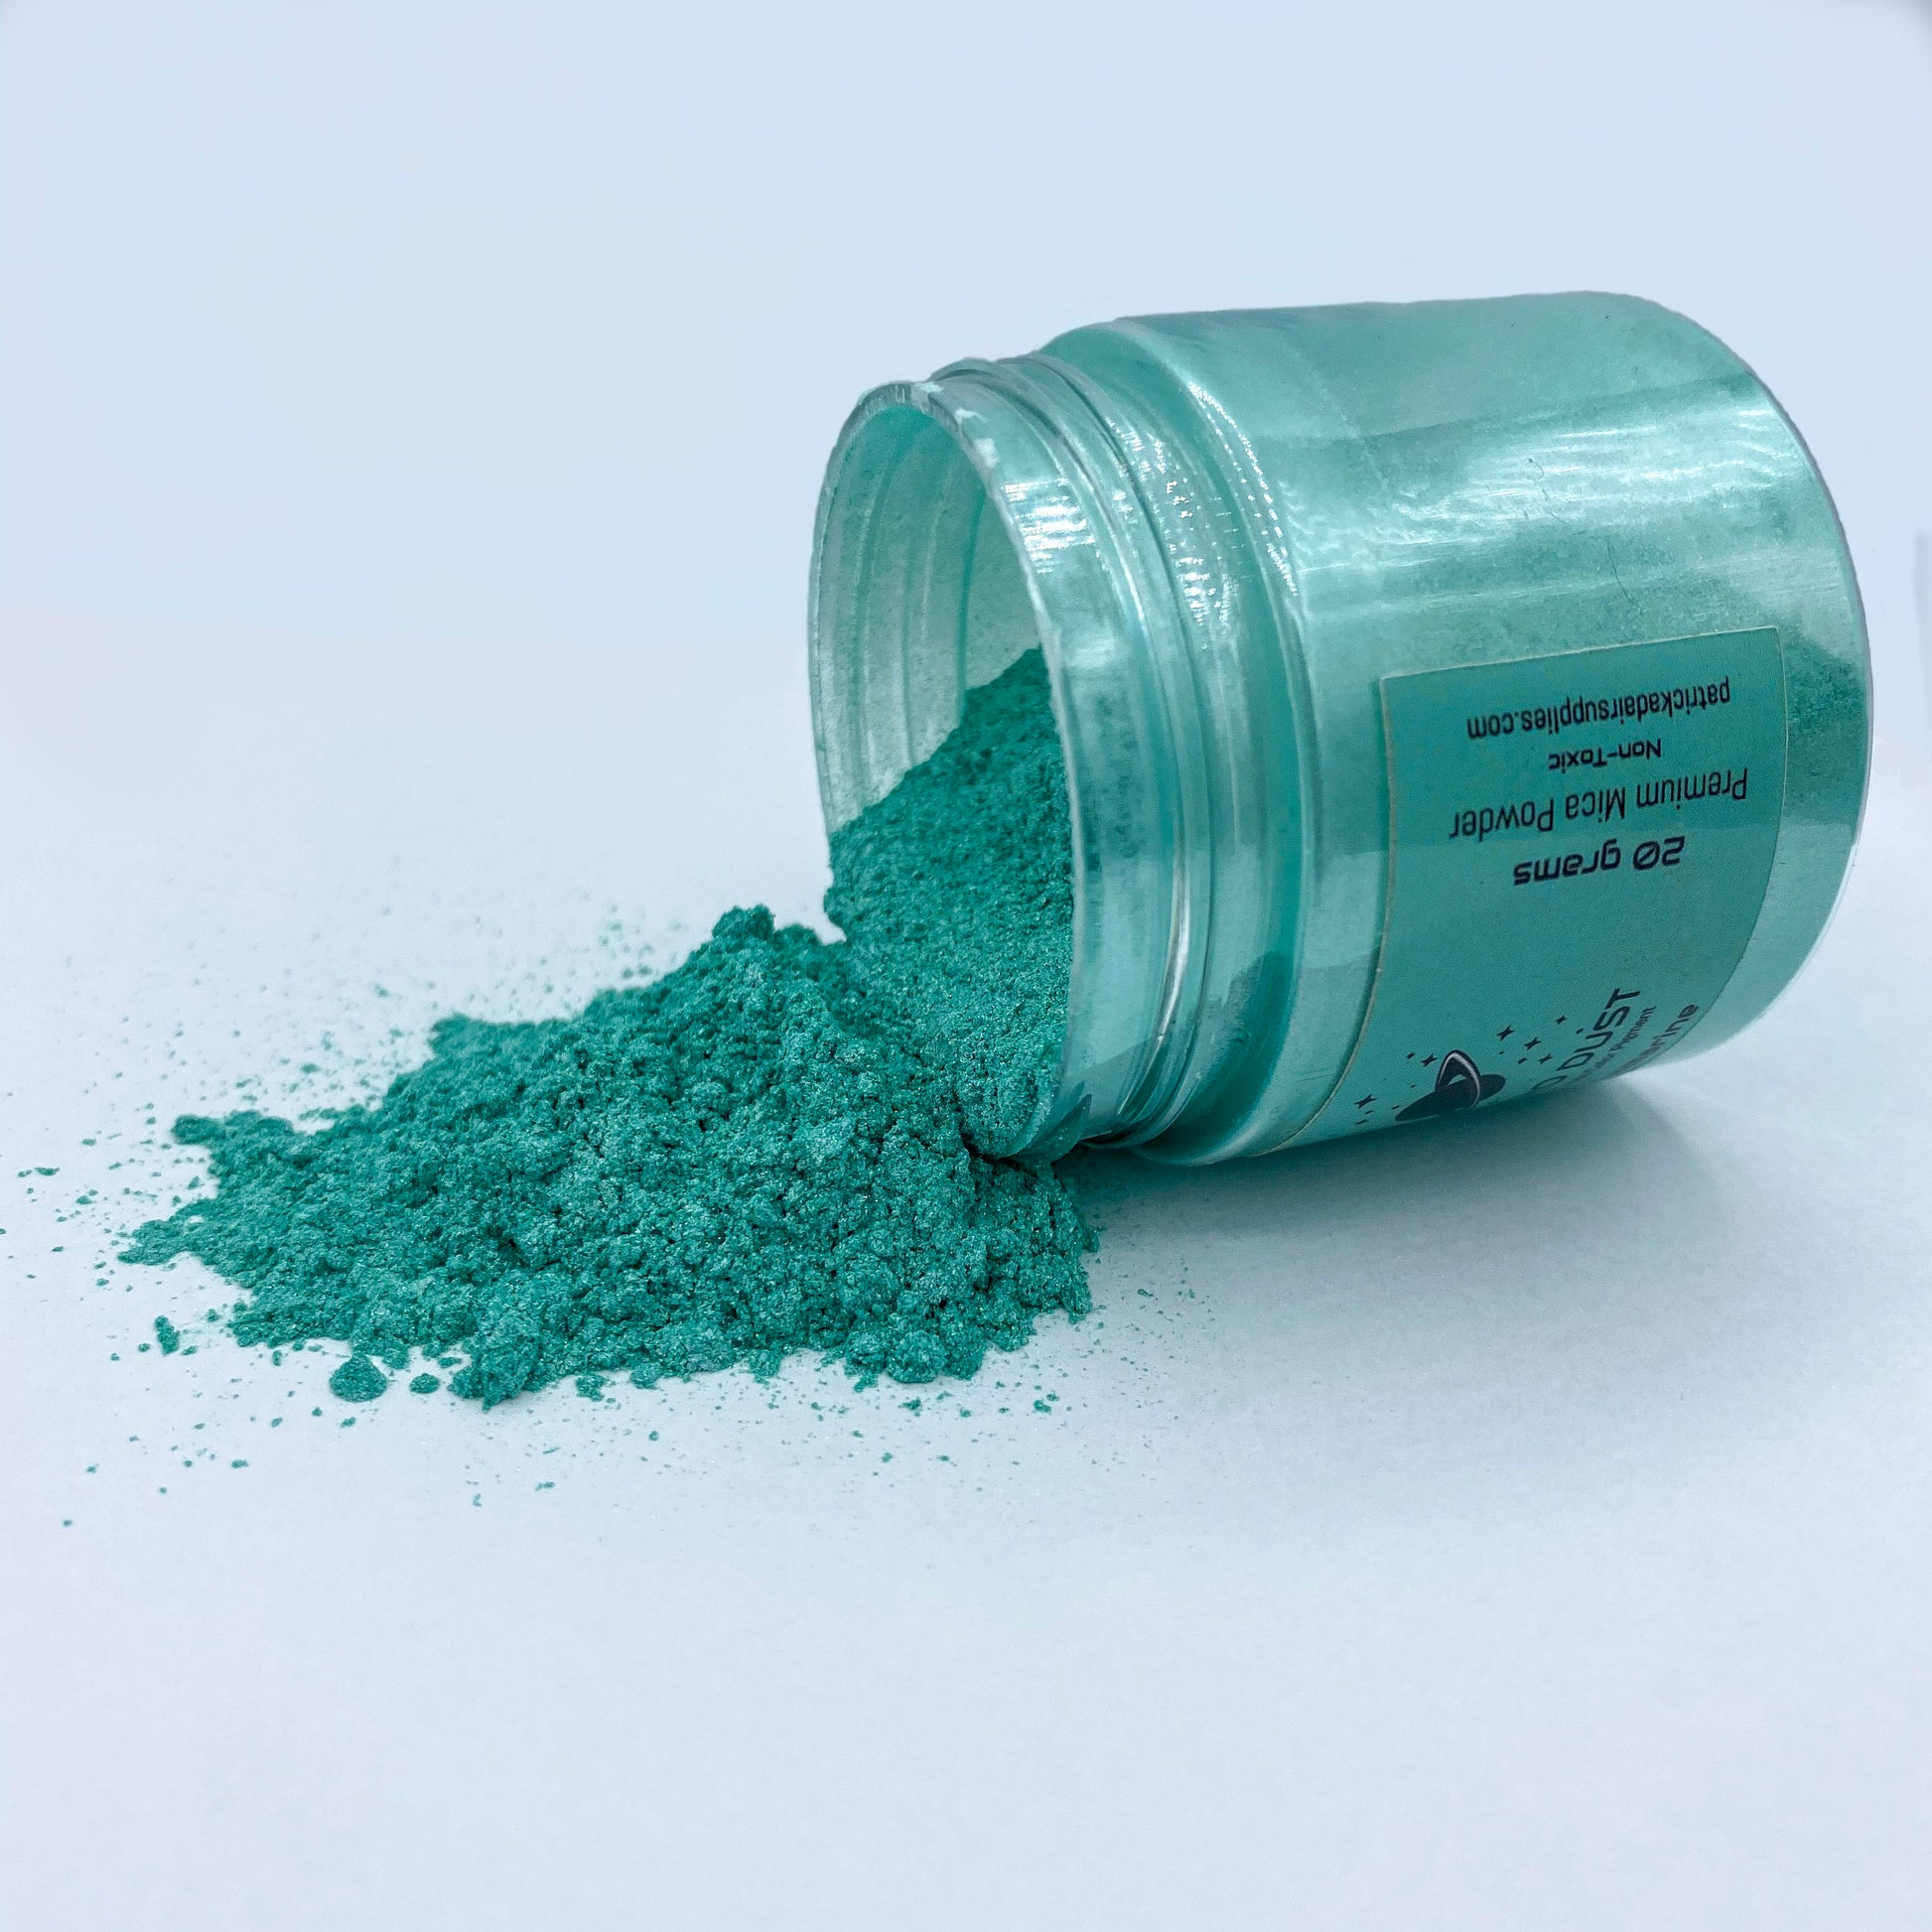 Non-Toxic Pigments, Mica Products, and More